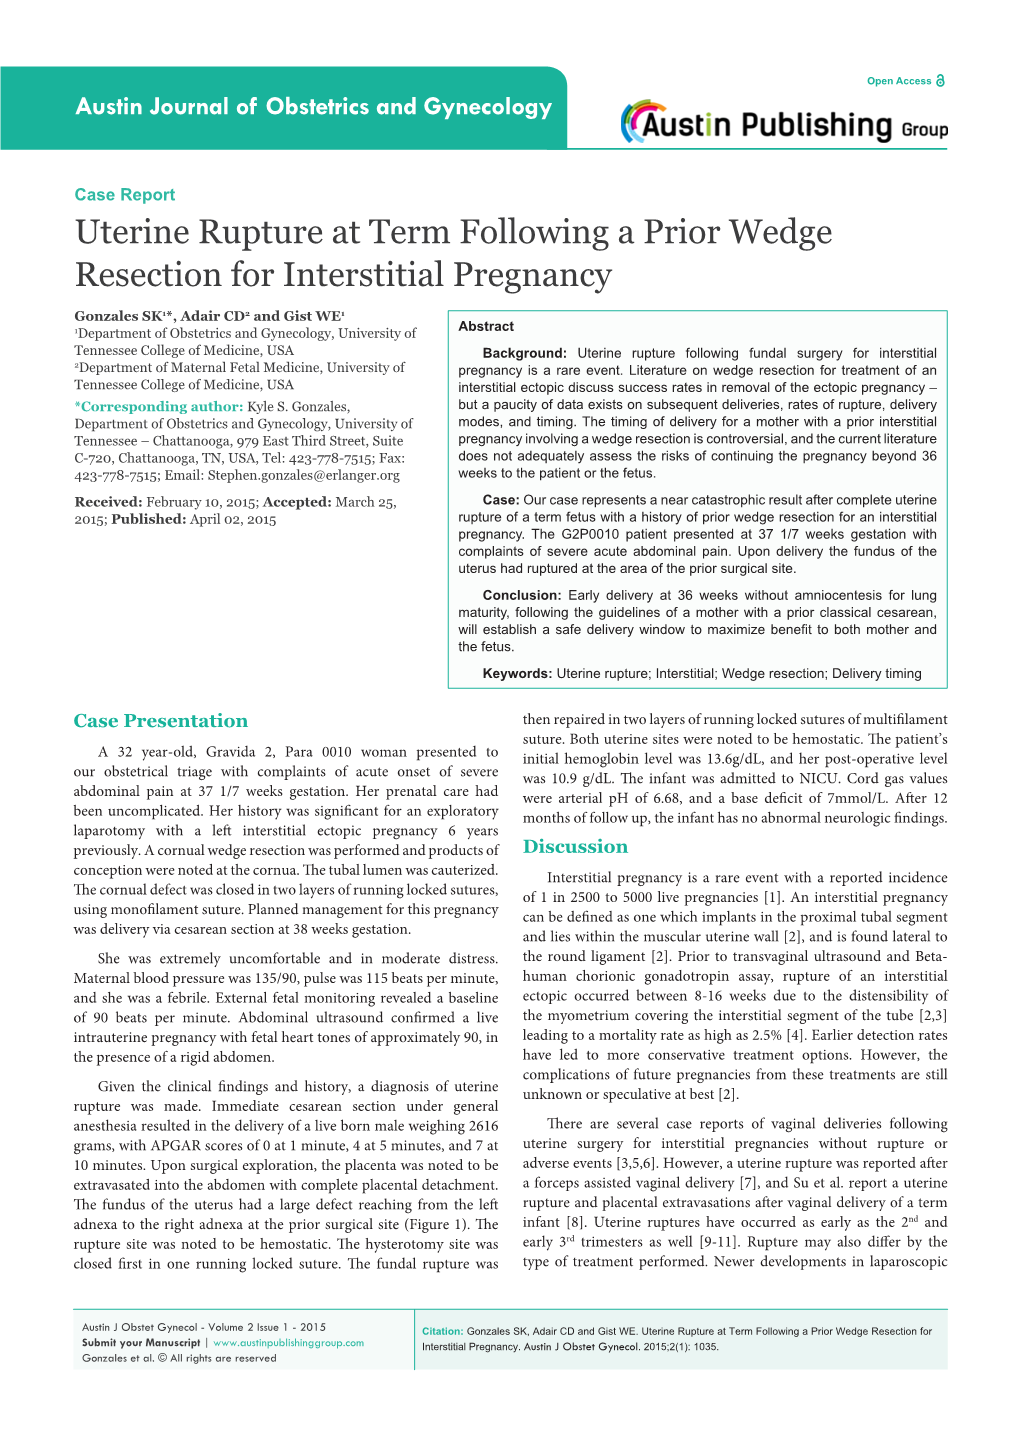 Uterine Rupture at Term Following a Prior Wedge Resection for Interstitial Pregnancy